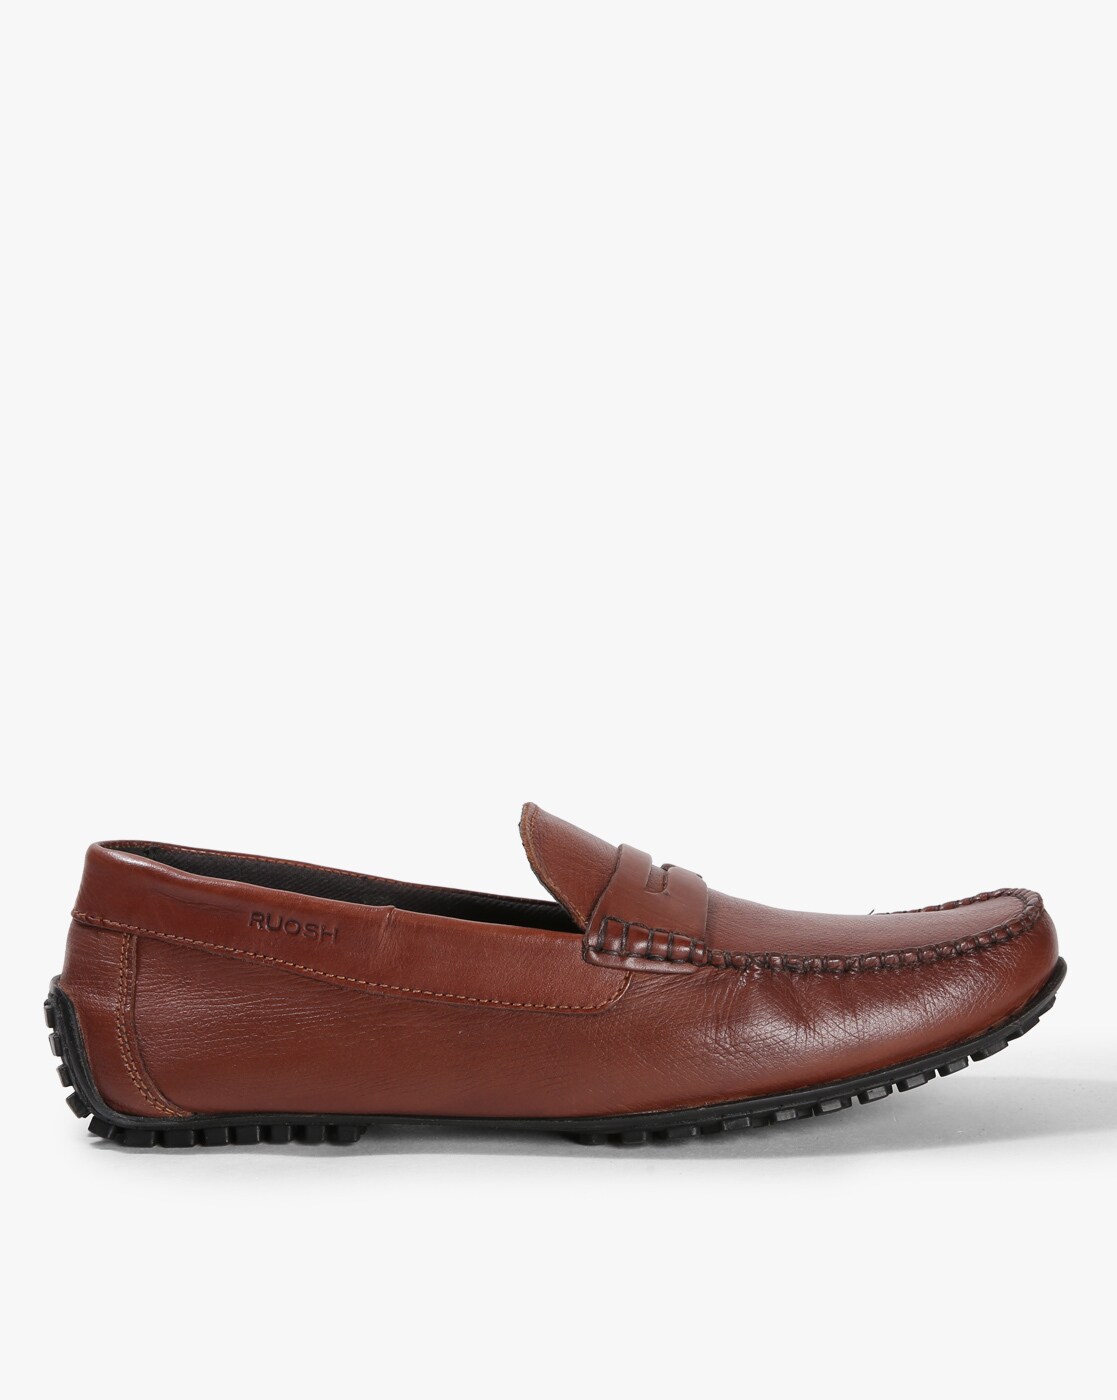 ruosh leather shoes